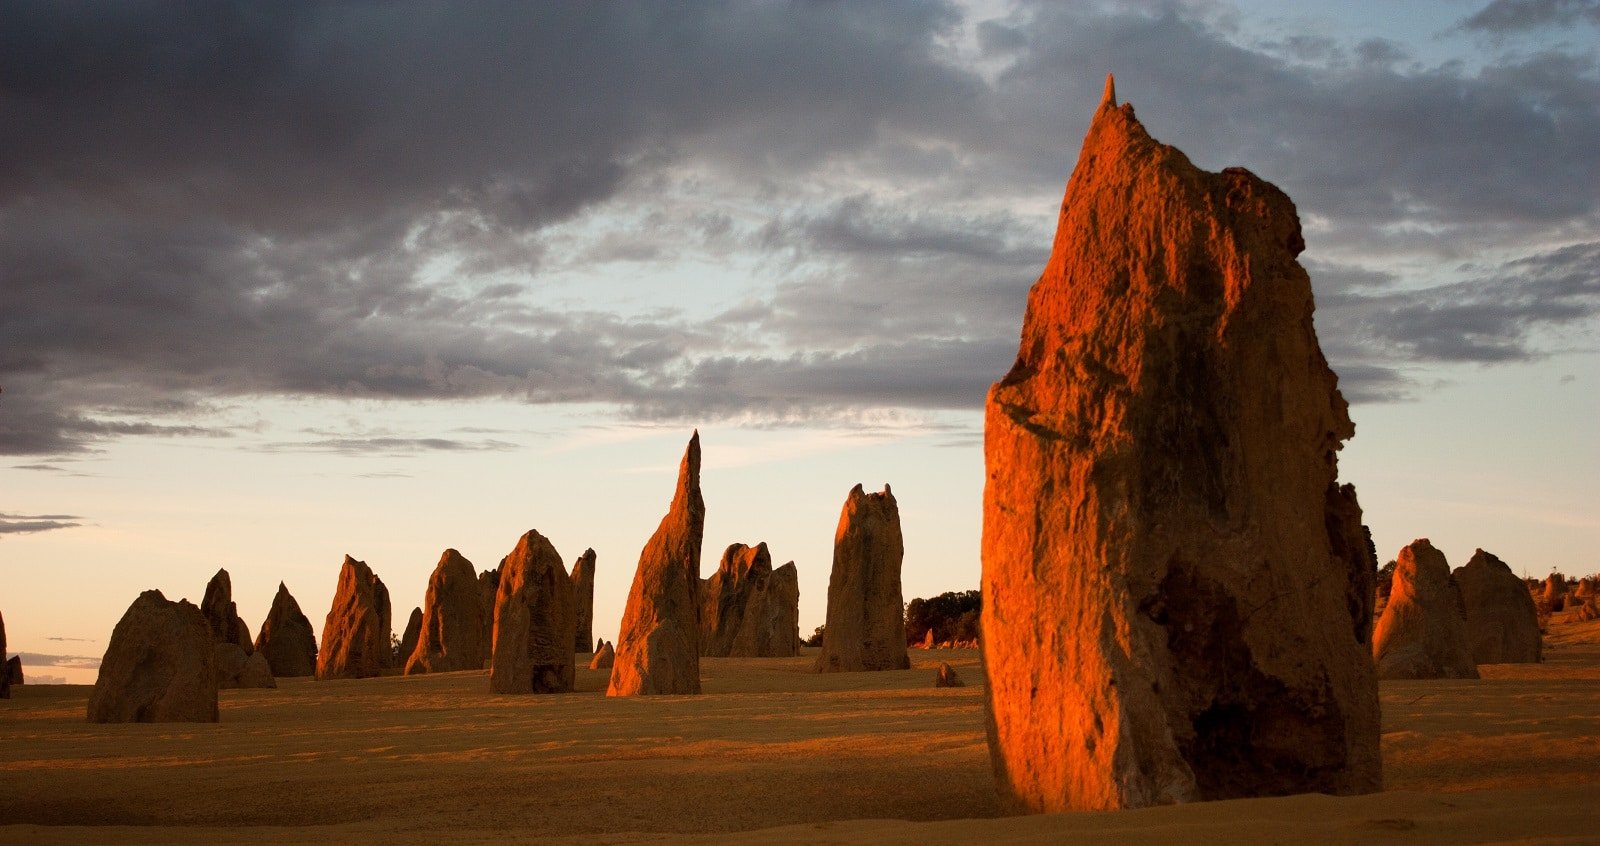 <p><span>The Pinnacles in Nambung National Park near Cervantes, Western Australia, are an intriguing natural formation of limestone pillars rising out of the sandy desert. The landscape here is otherworldly, with thousands of these unique structures dotting the landscape.</span></p> <p><span>The Pinnacles are particularly striking at sunrise or sunset when the light casts long shadows and enhances the colors of the formations. The park also offers beautiful beaches and opportunities to spot wildlife, including kangaroos and emus. A visit to the Pinnacles is a journey into one of Australia’s most unusual and photogenic landscapes. </span></p> <p><b>Insider’s Tip: </b><span>Visit during wildflower season (August to October) to see the desert bloom with color. </span></p> <p><b>When to Travel: </b><span>April to October for cooler temperatures and less chance of rain. </span></p> <p><b>How to Get There: </b><span>Drive from Perth to Nambung National Park.</span></p>